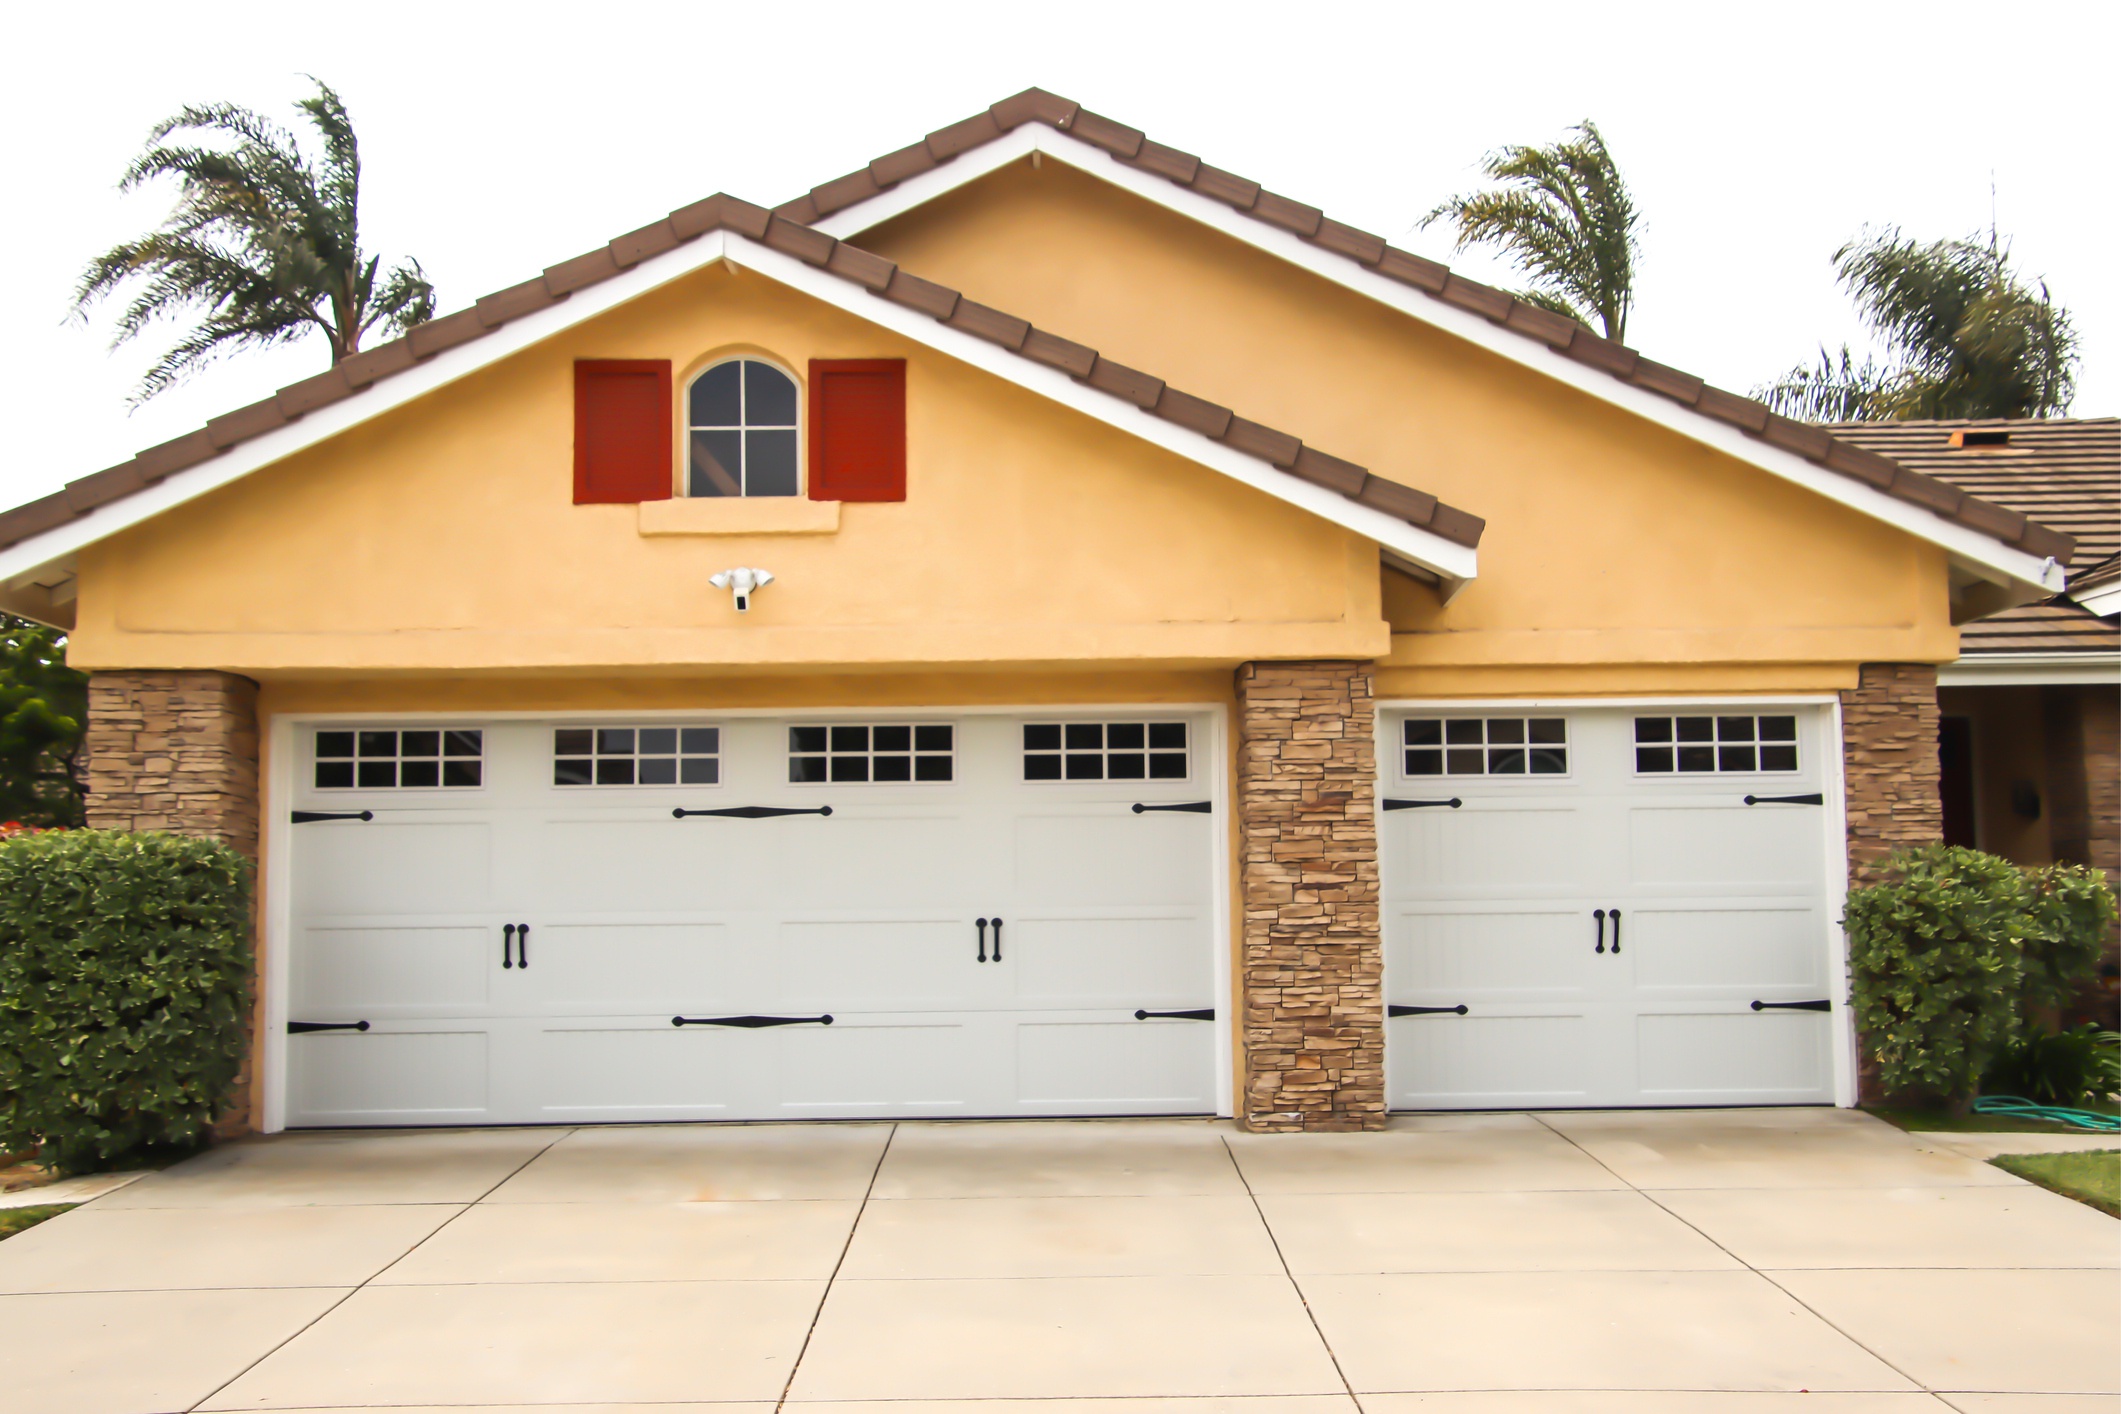 A double gabled yellow house with two white garage doors